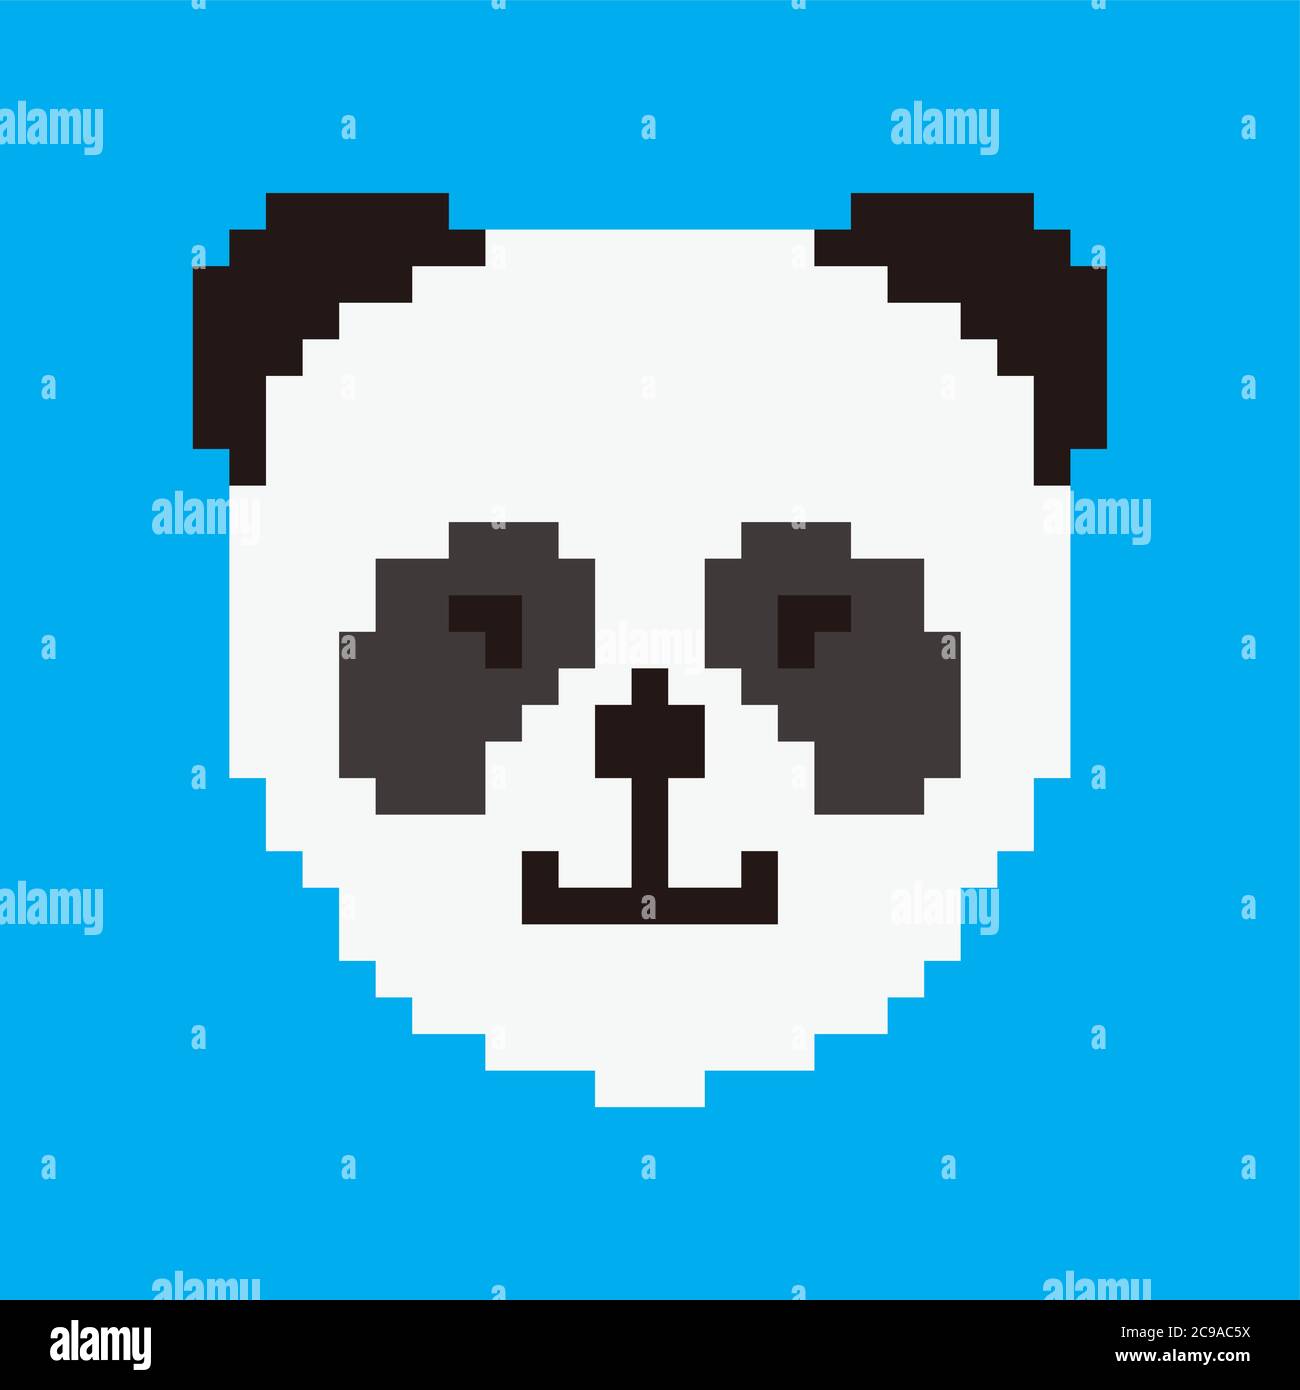 Pixel art character panda 8 bit pixel art black and white bear isolated on white background. Chinese endangered species symbol. Wildlife animal icon. Stock Vector